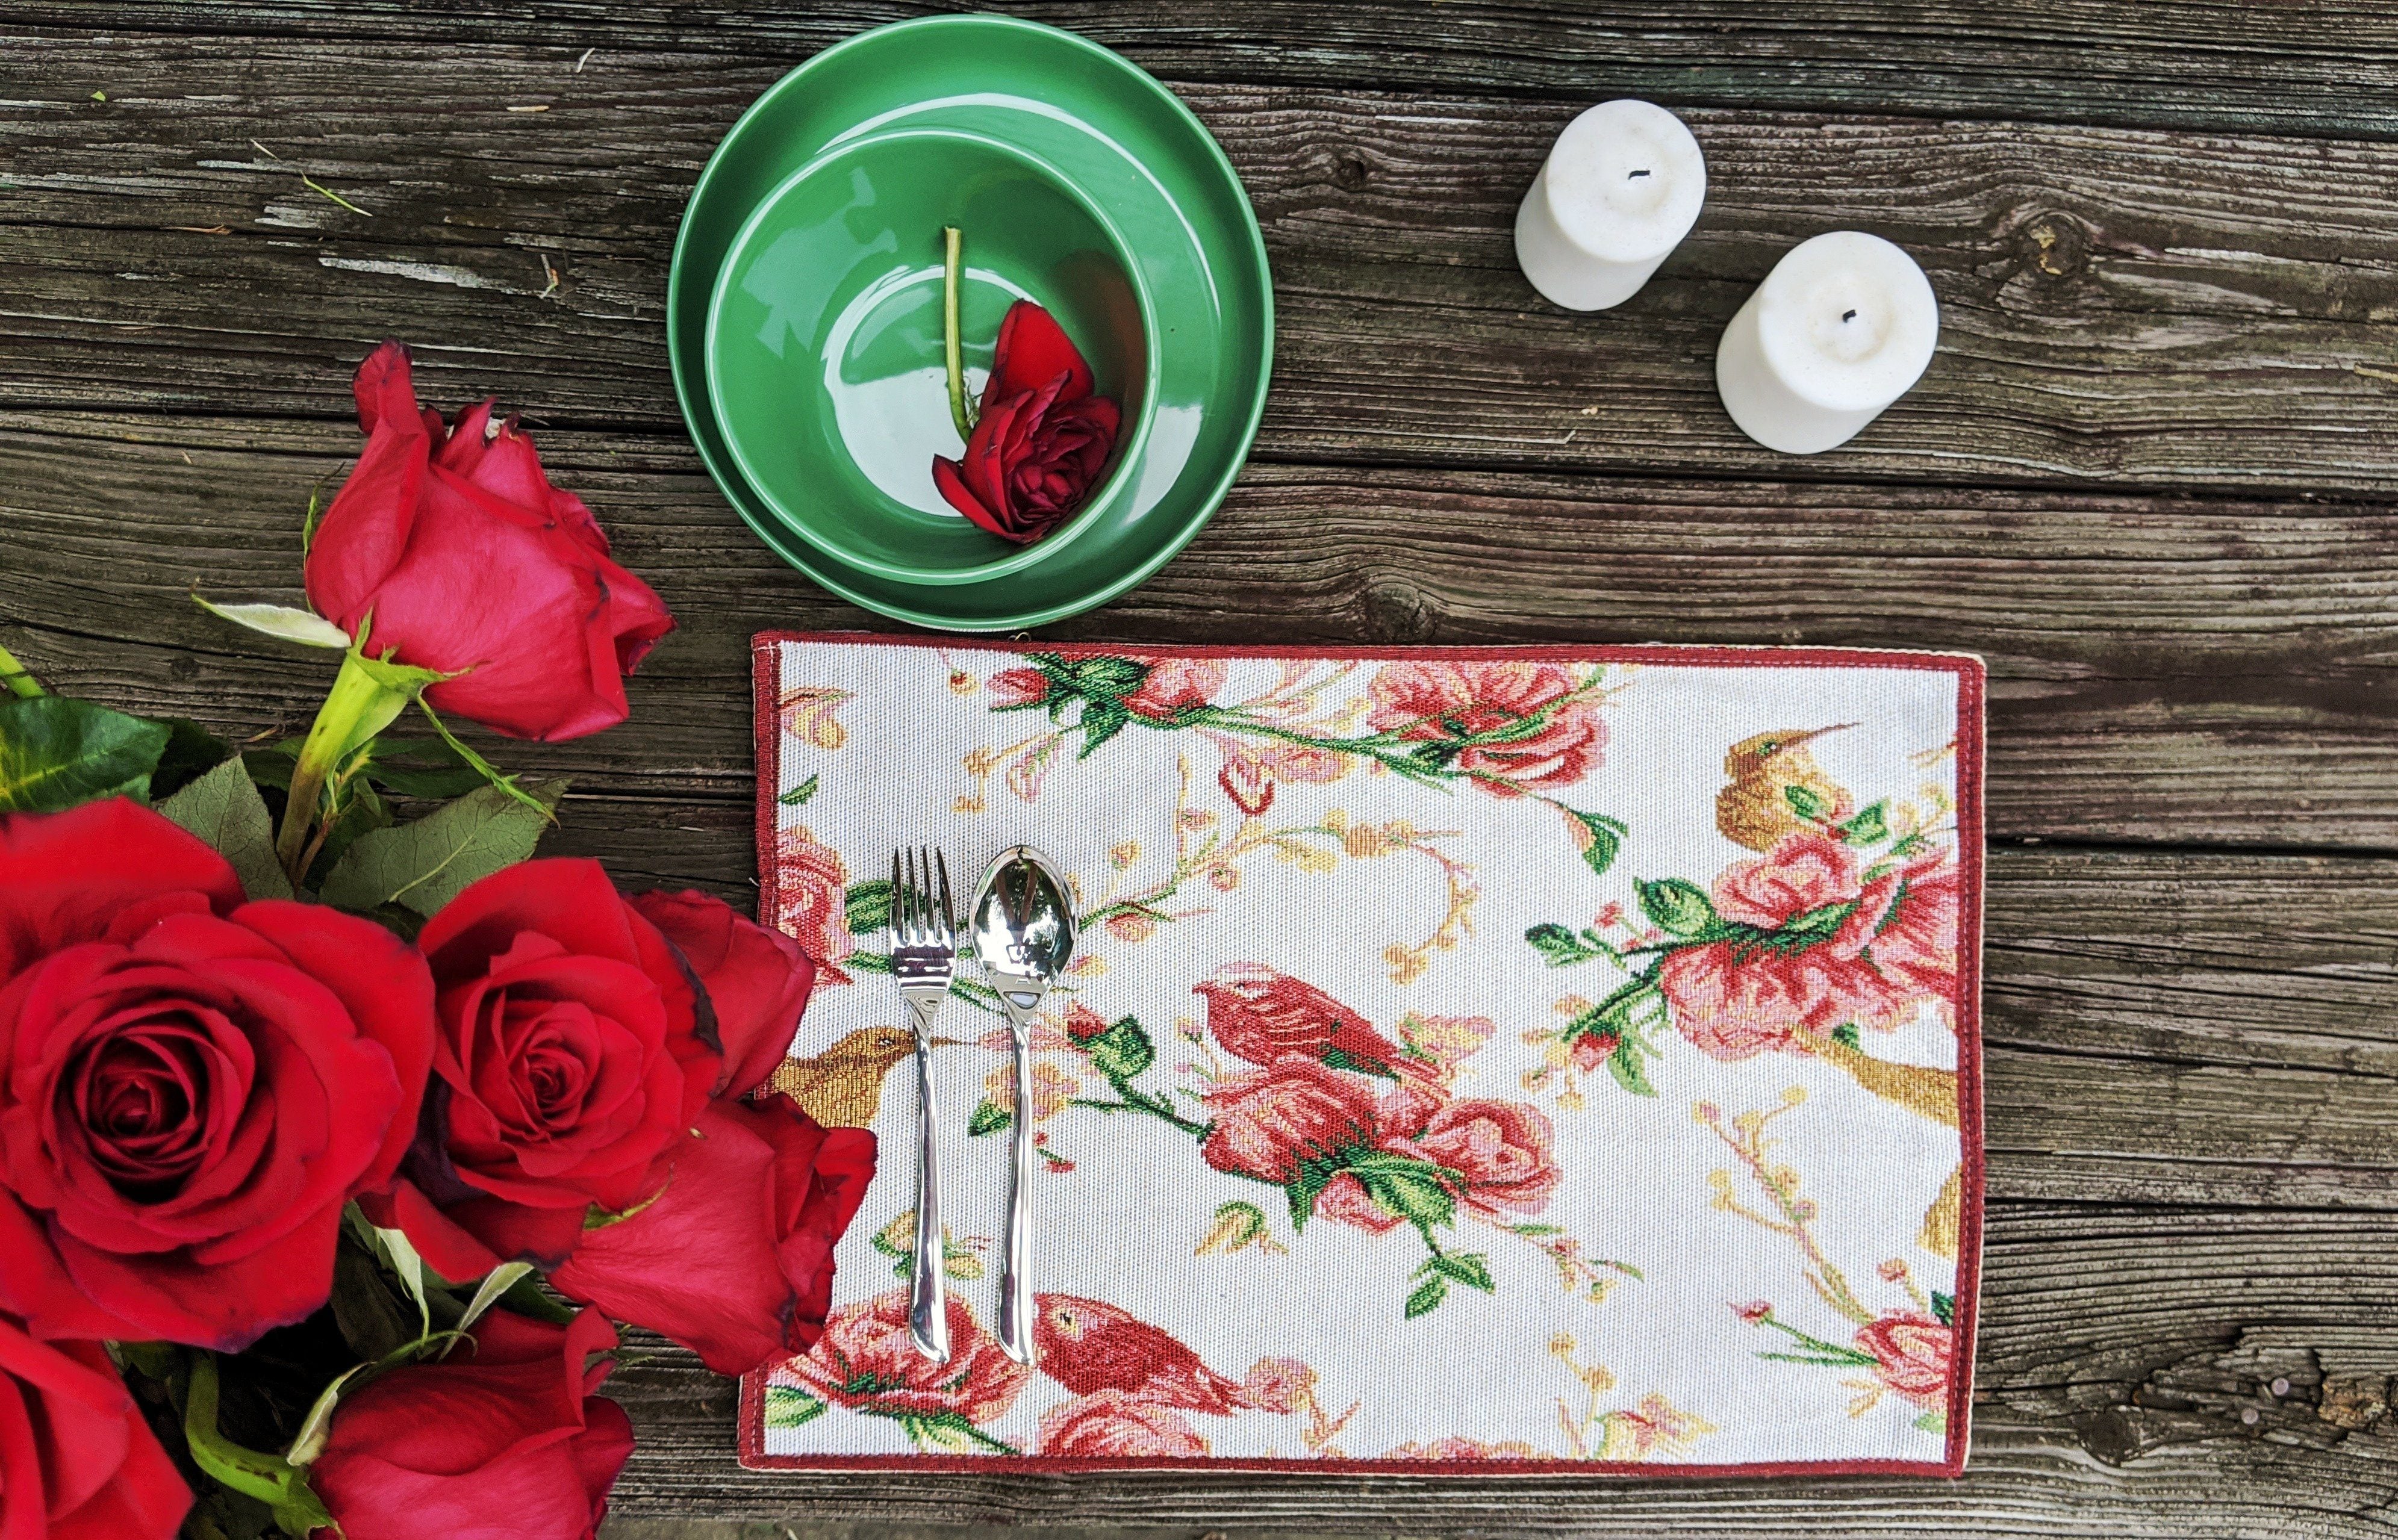 Tache Floral Red Roses Hummingbirds Woven Tapestry Placemat Set (18109) - Tache Home Fashion